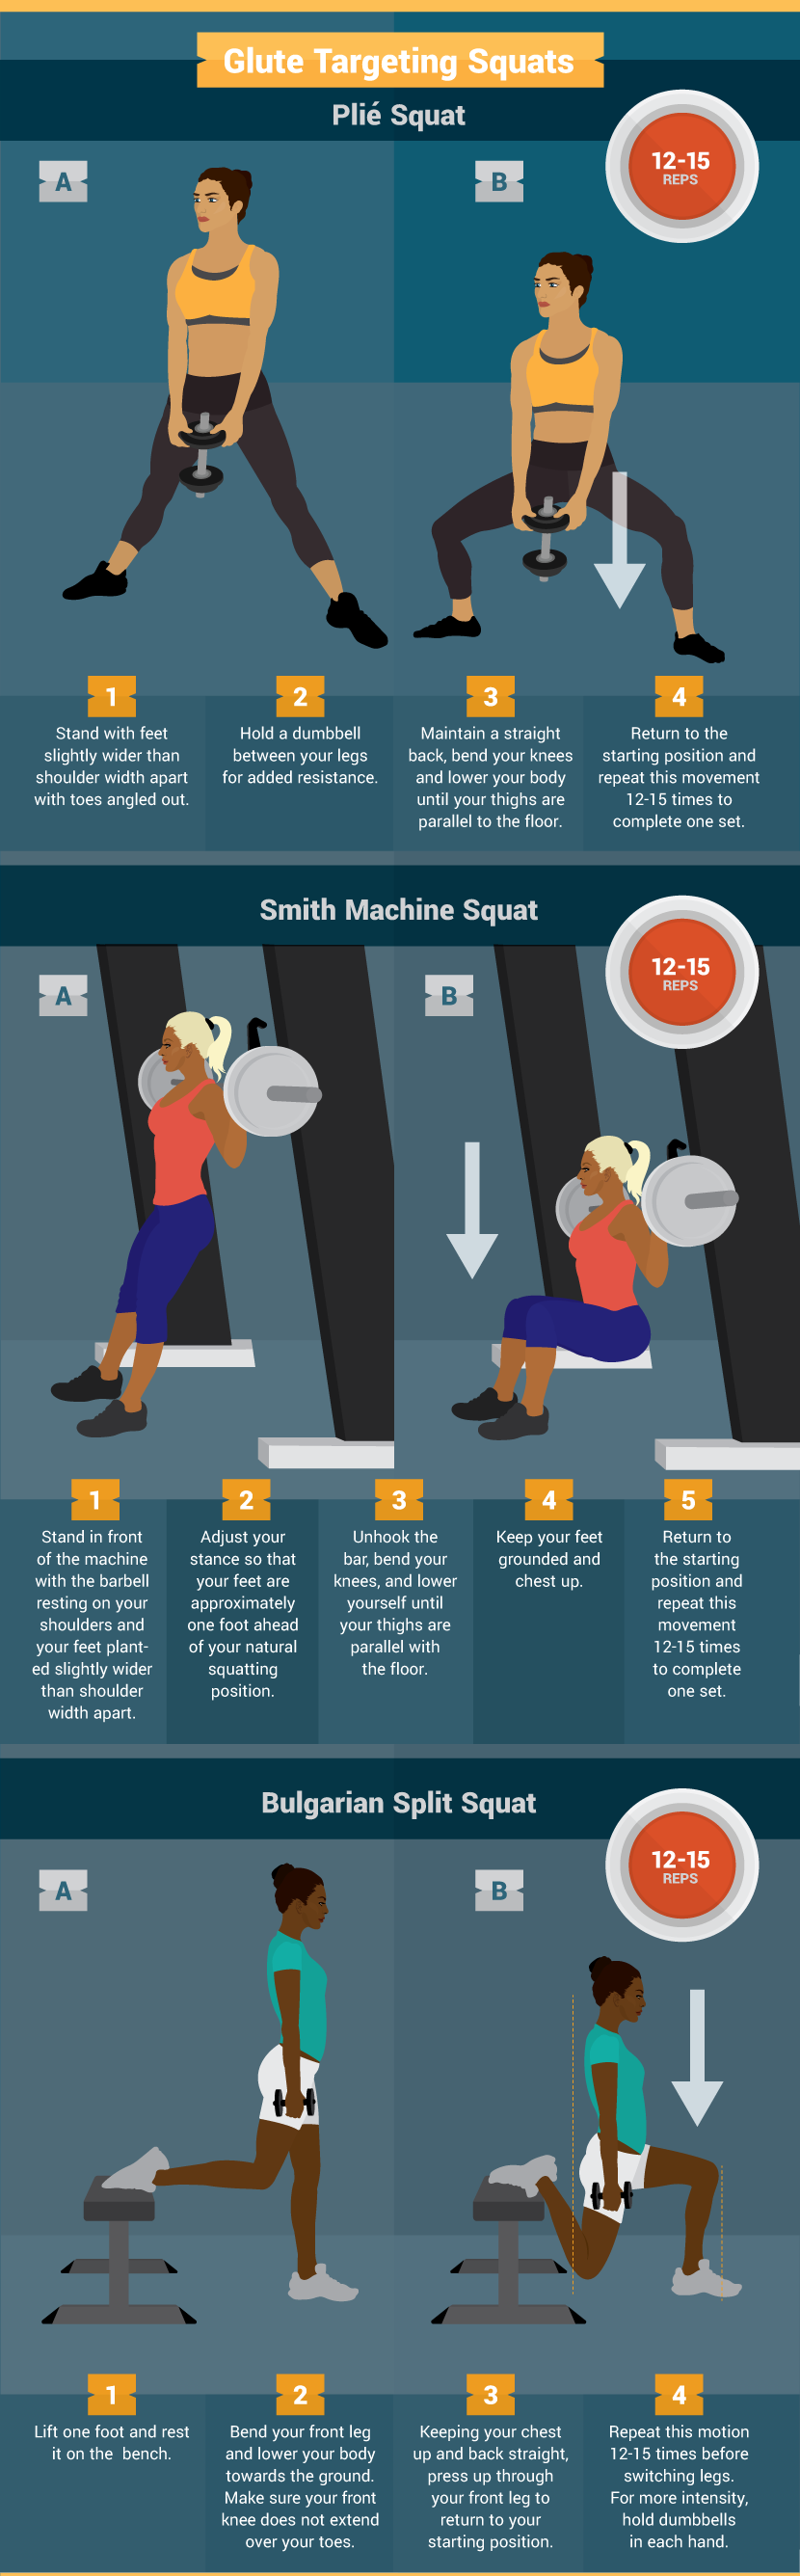 Glute Targeting Squats - Guide to Getting Great Glutes